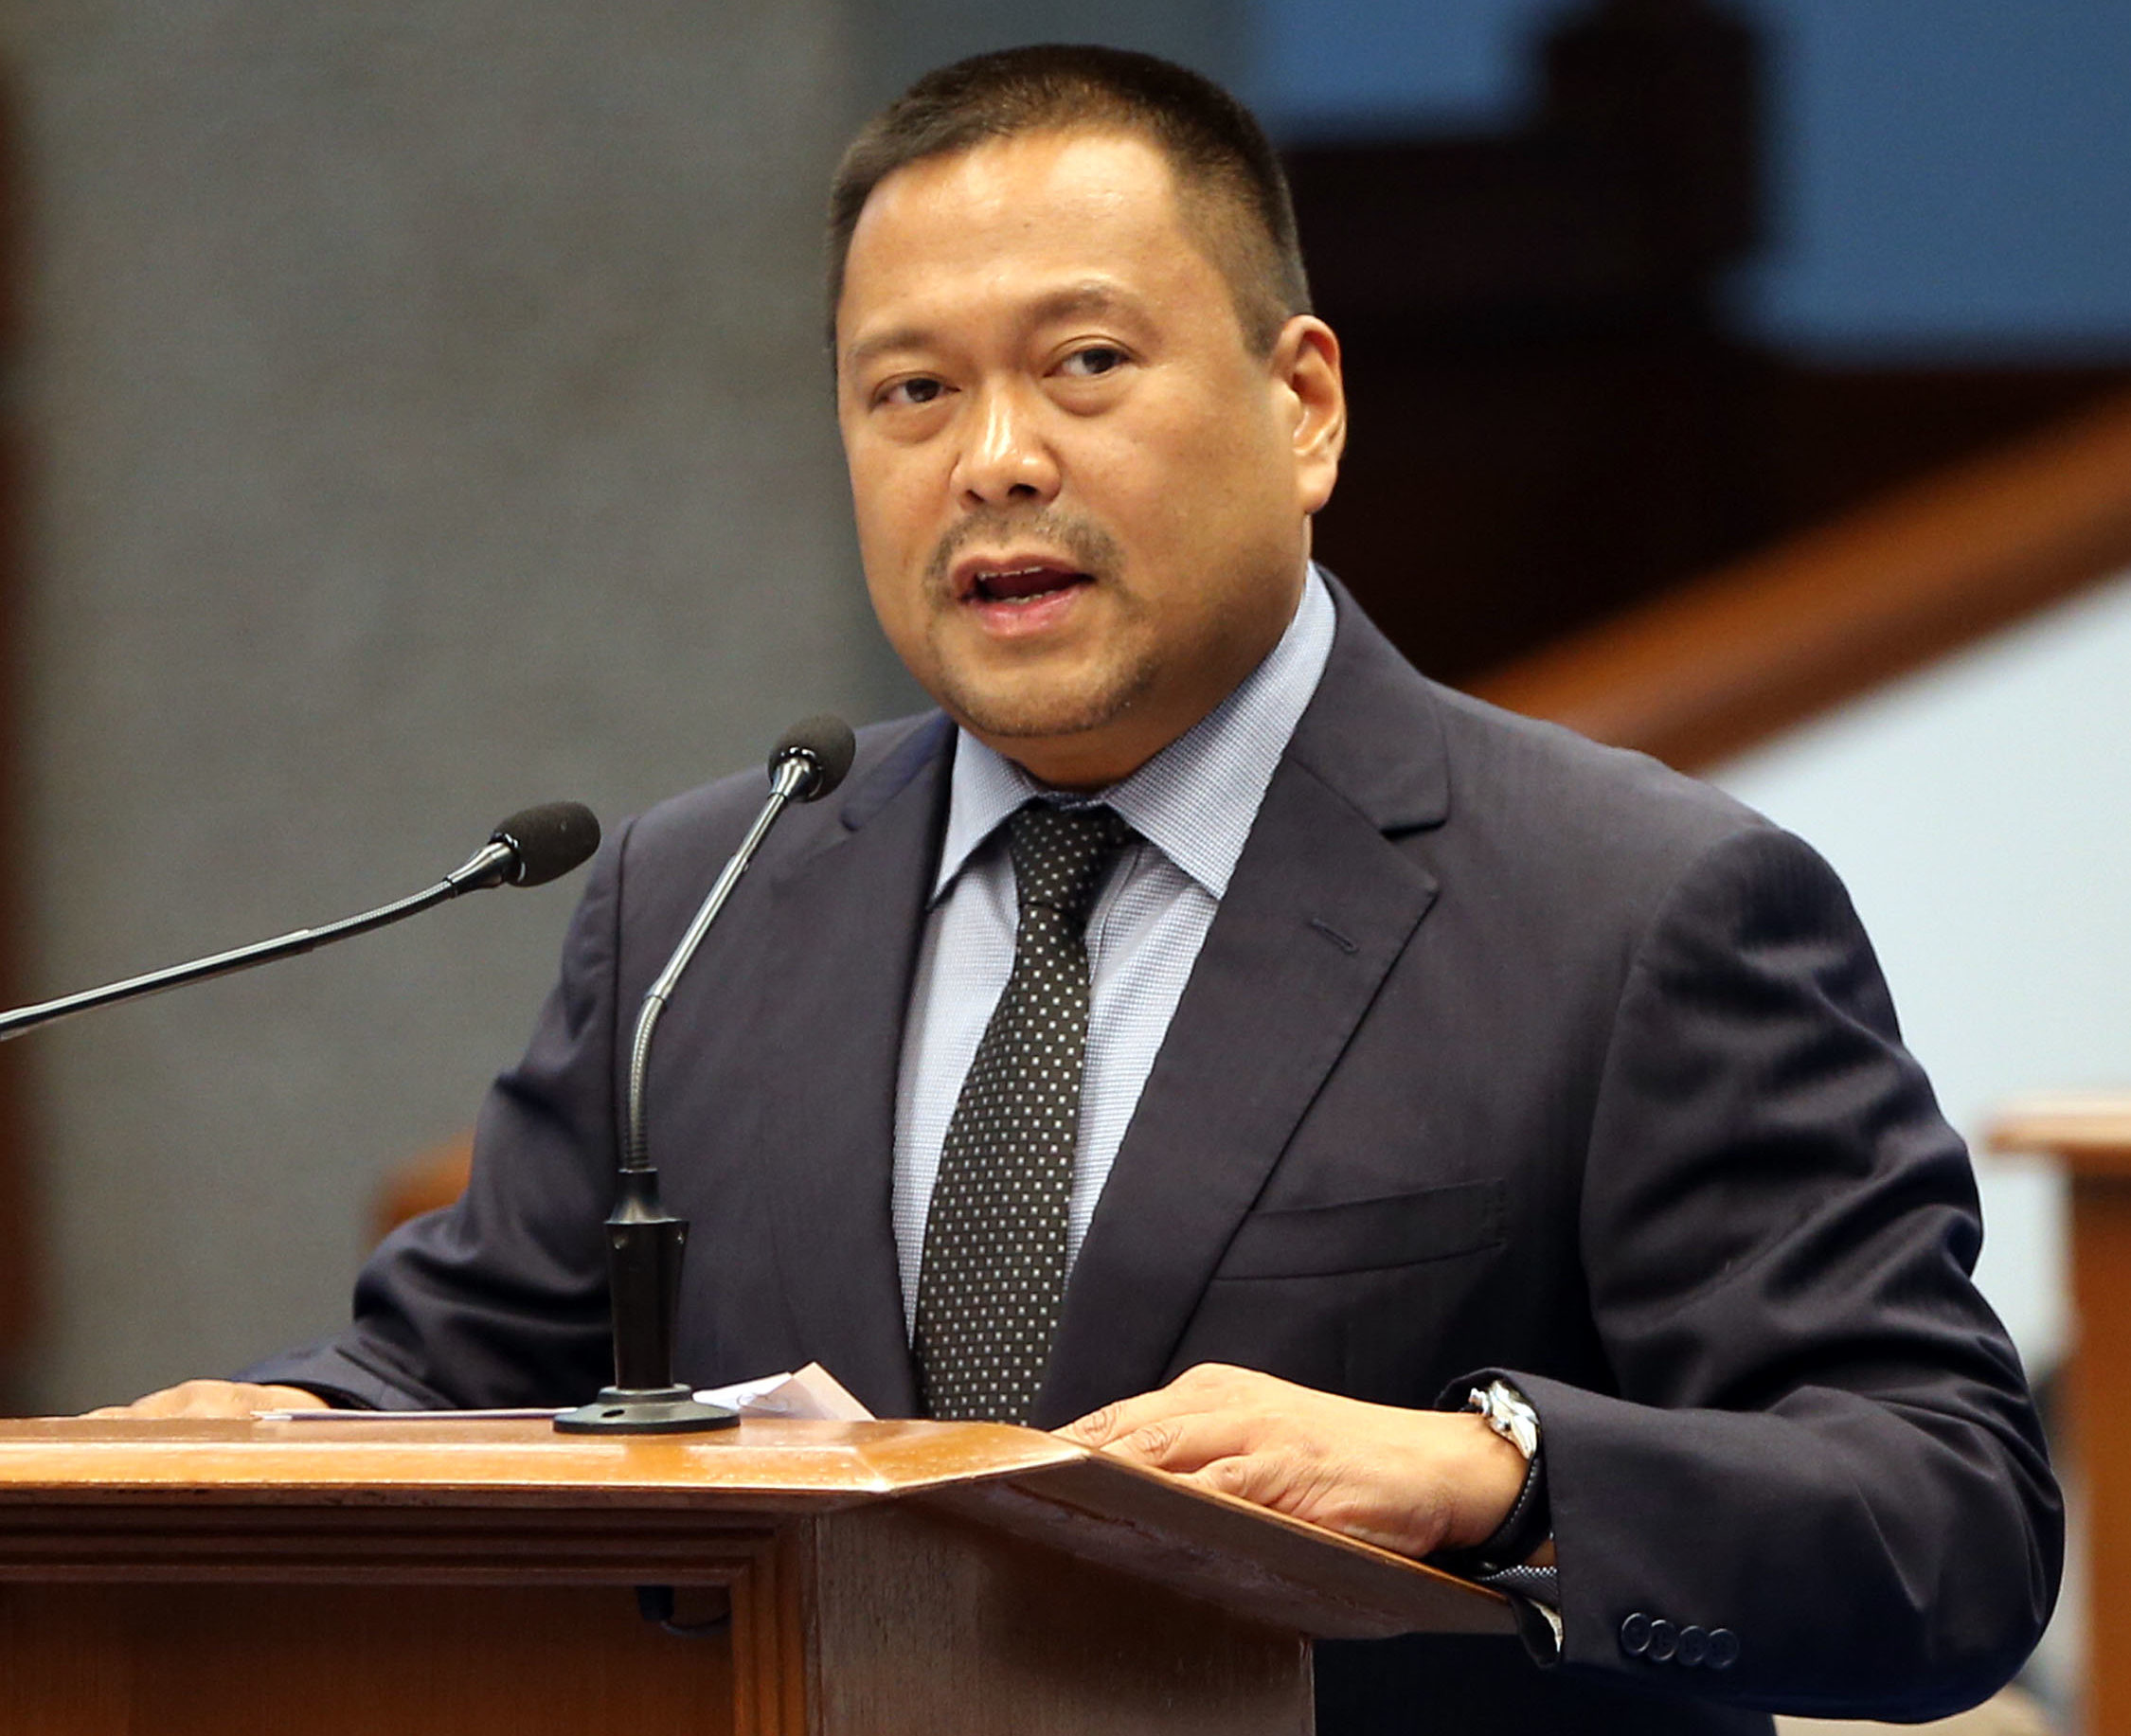 JV Ejercito accepts fate, leaving Senate with ‘integrity intact’